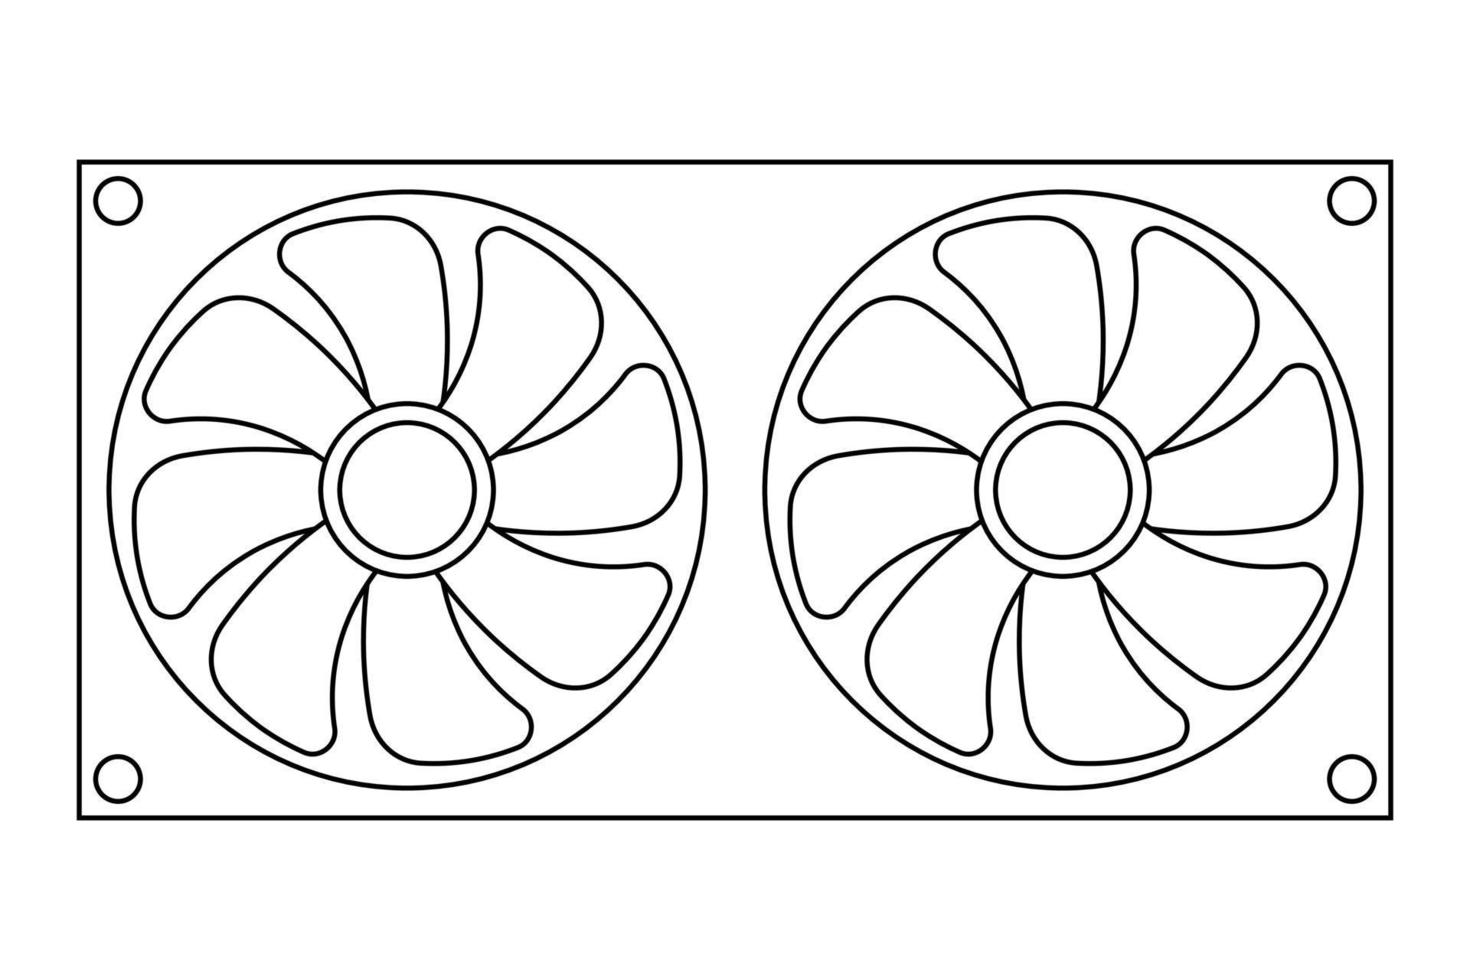 Simple illustration of fan or cooling system vector